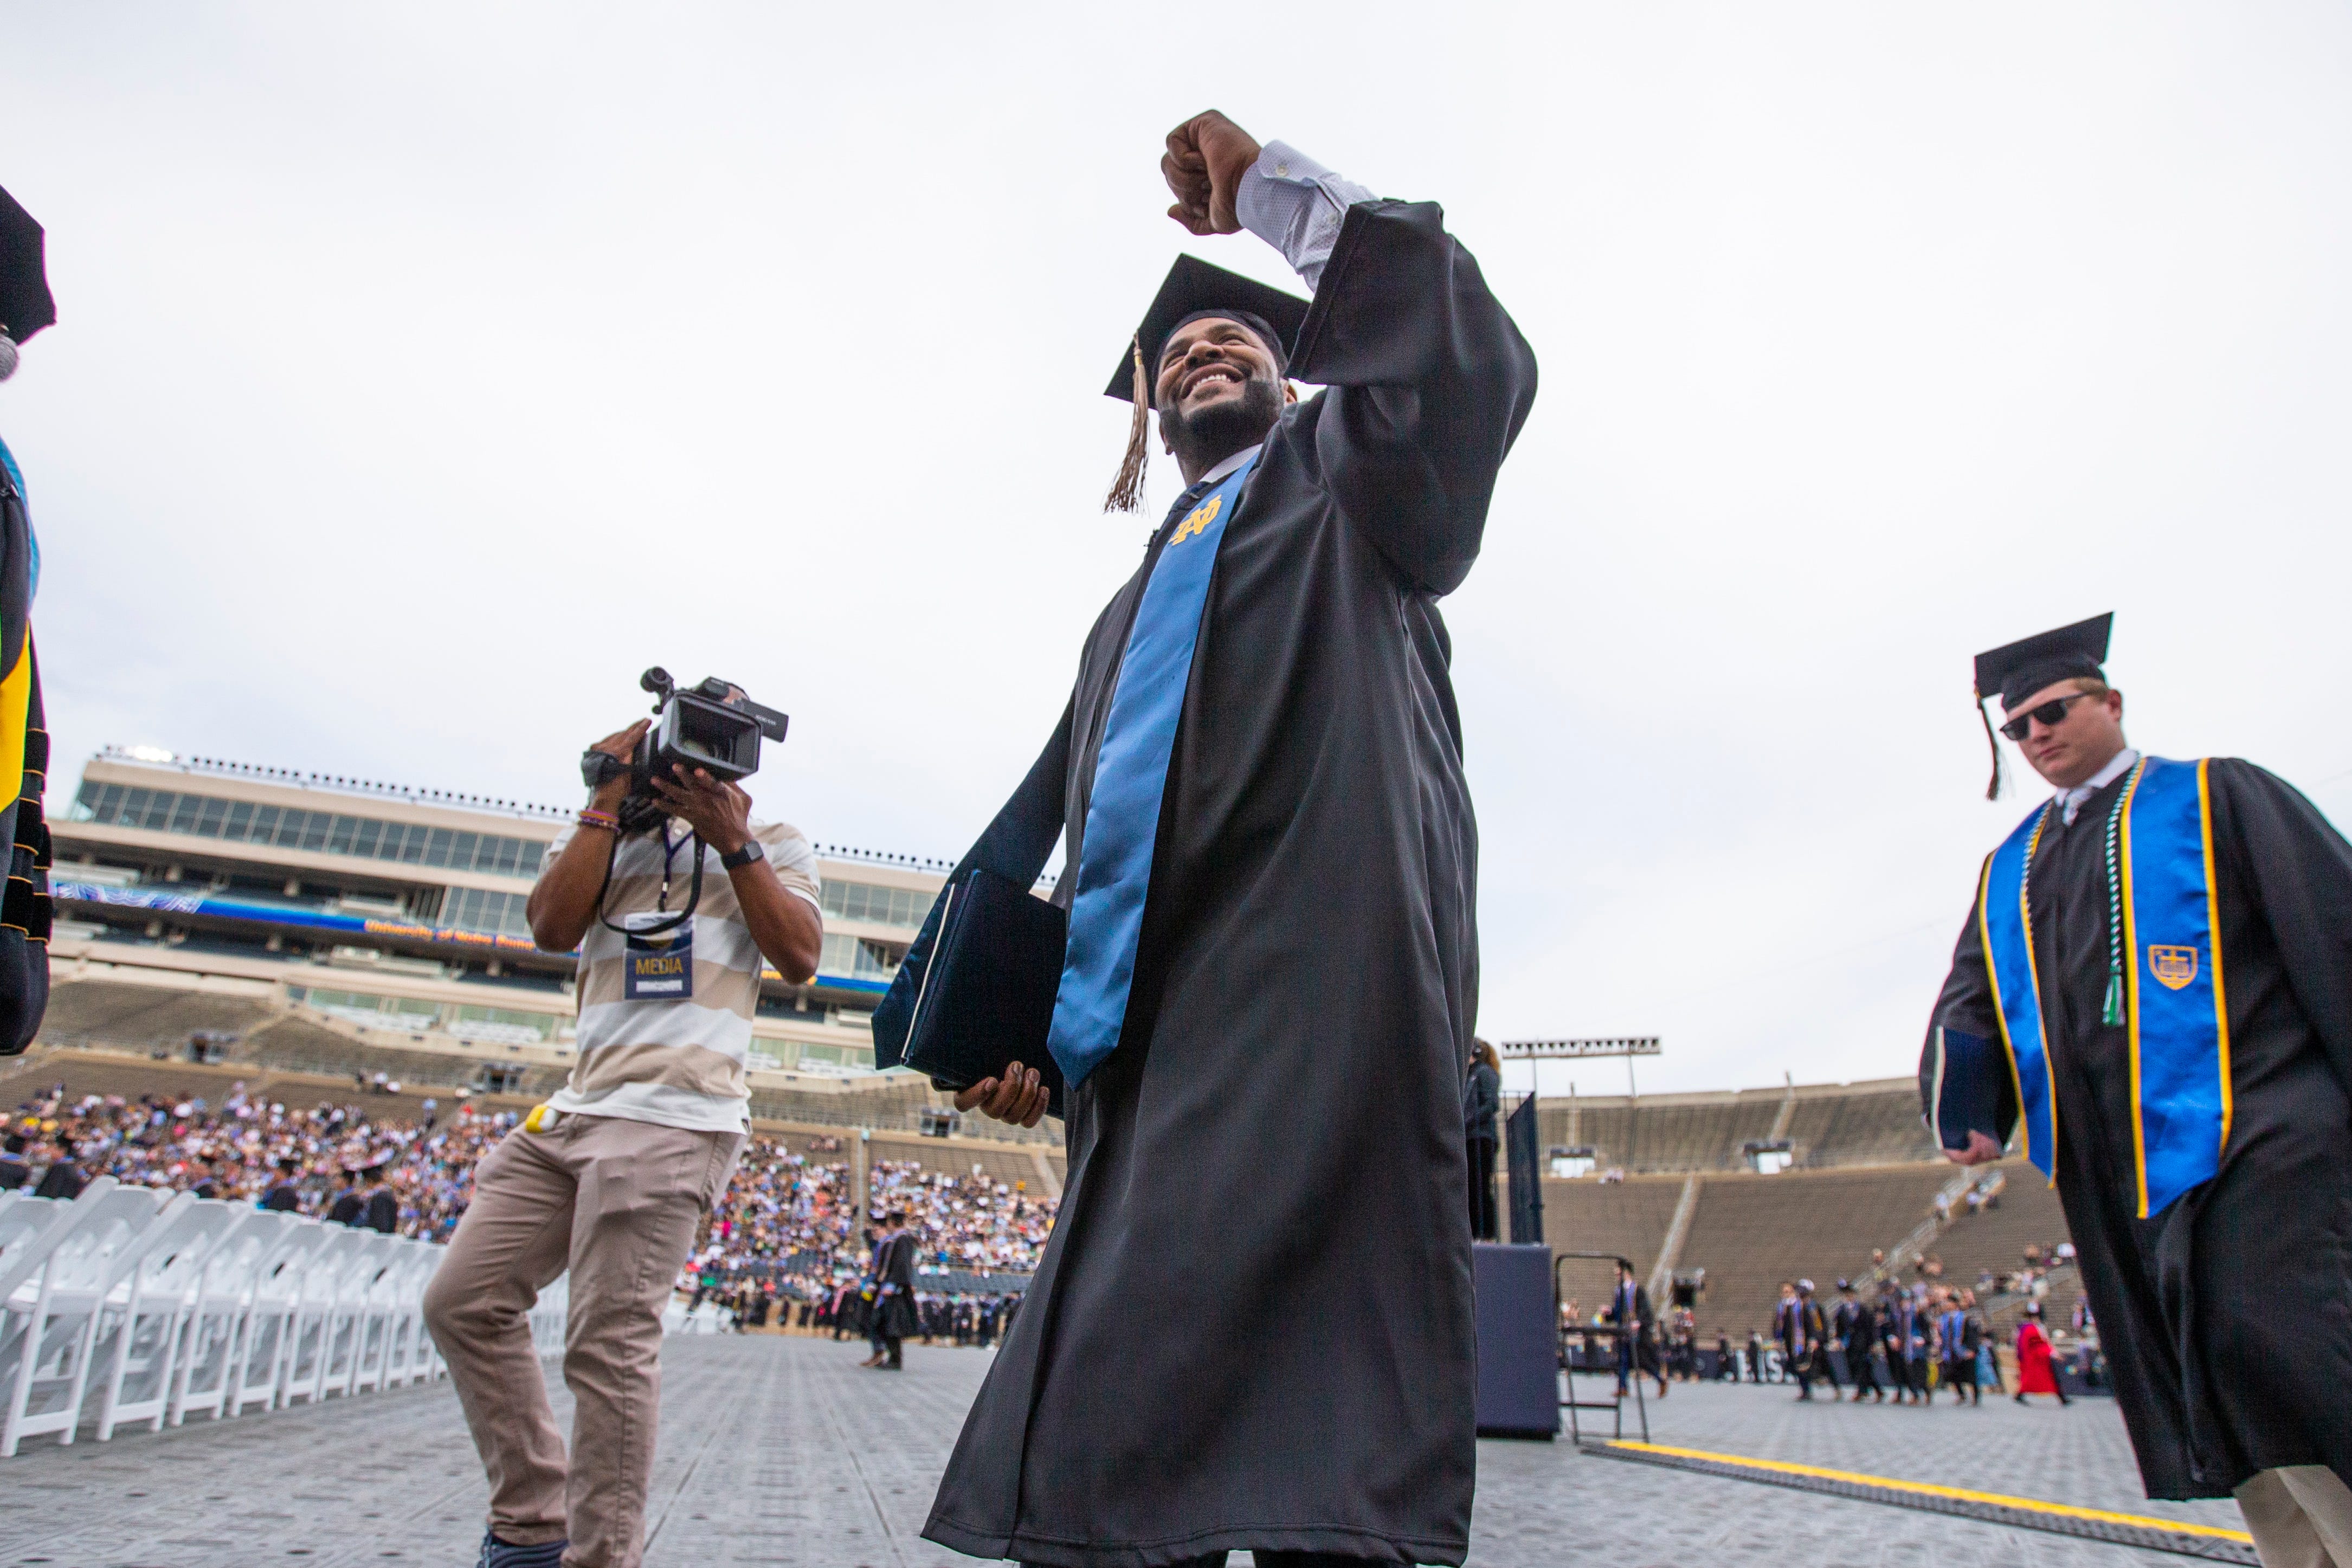 'Promise made, promise kept': Jerome Bettis keeps word to mother, graduates from Notre Dame